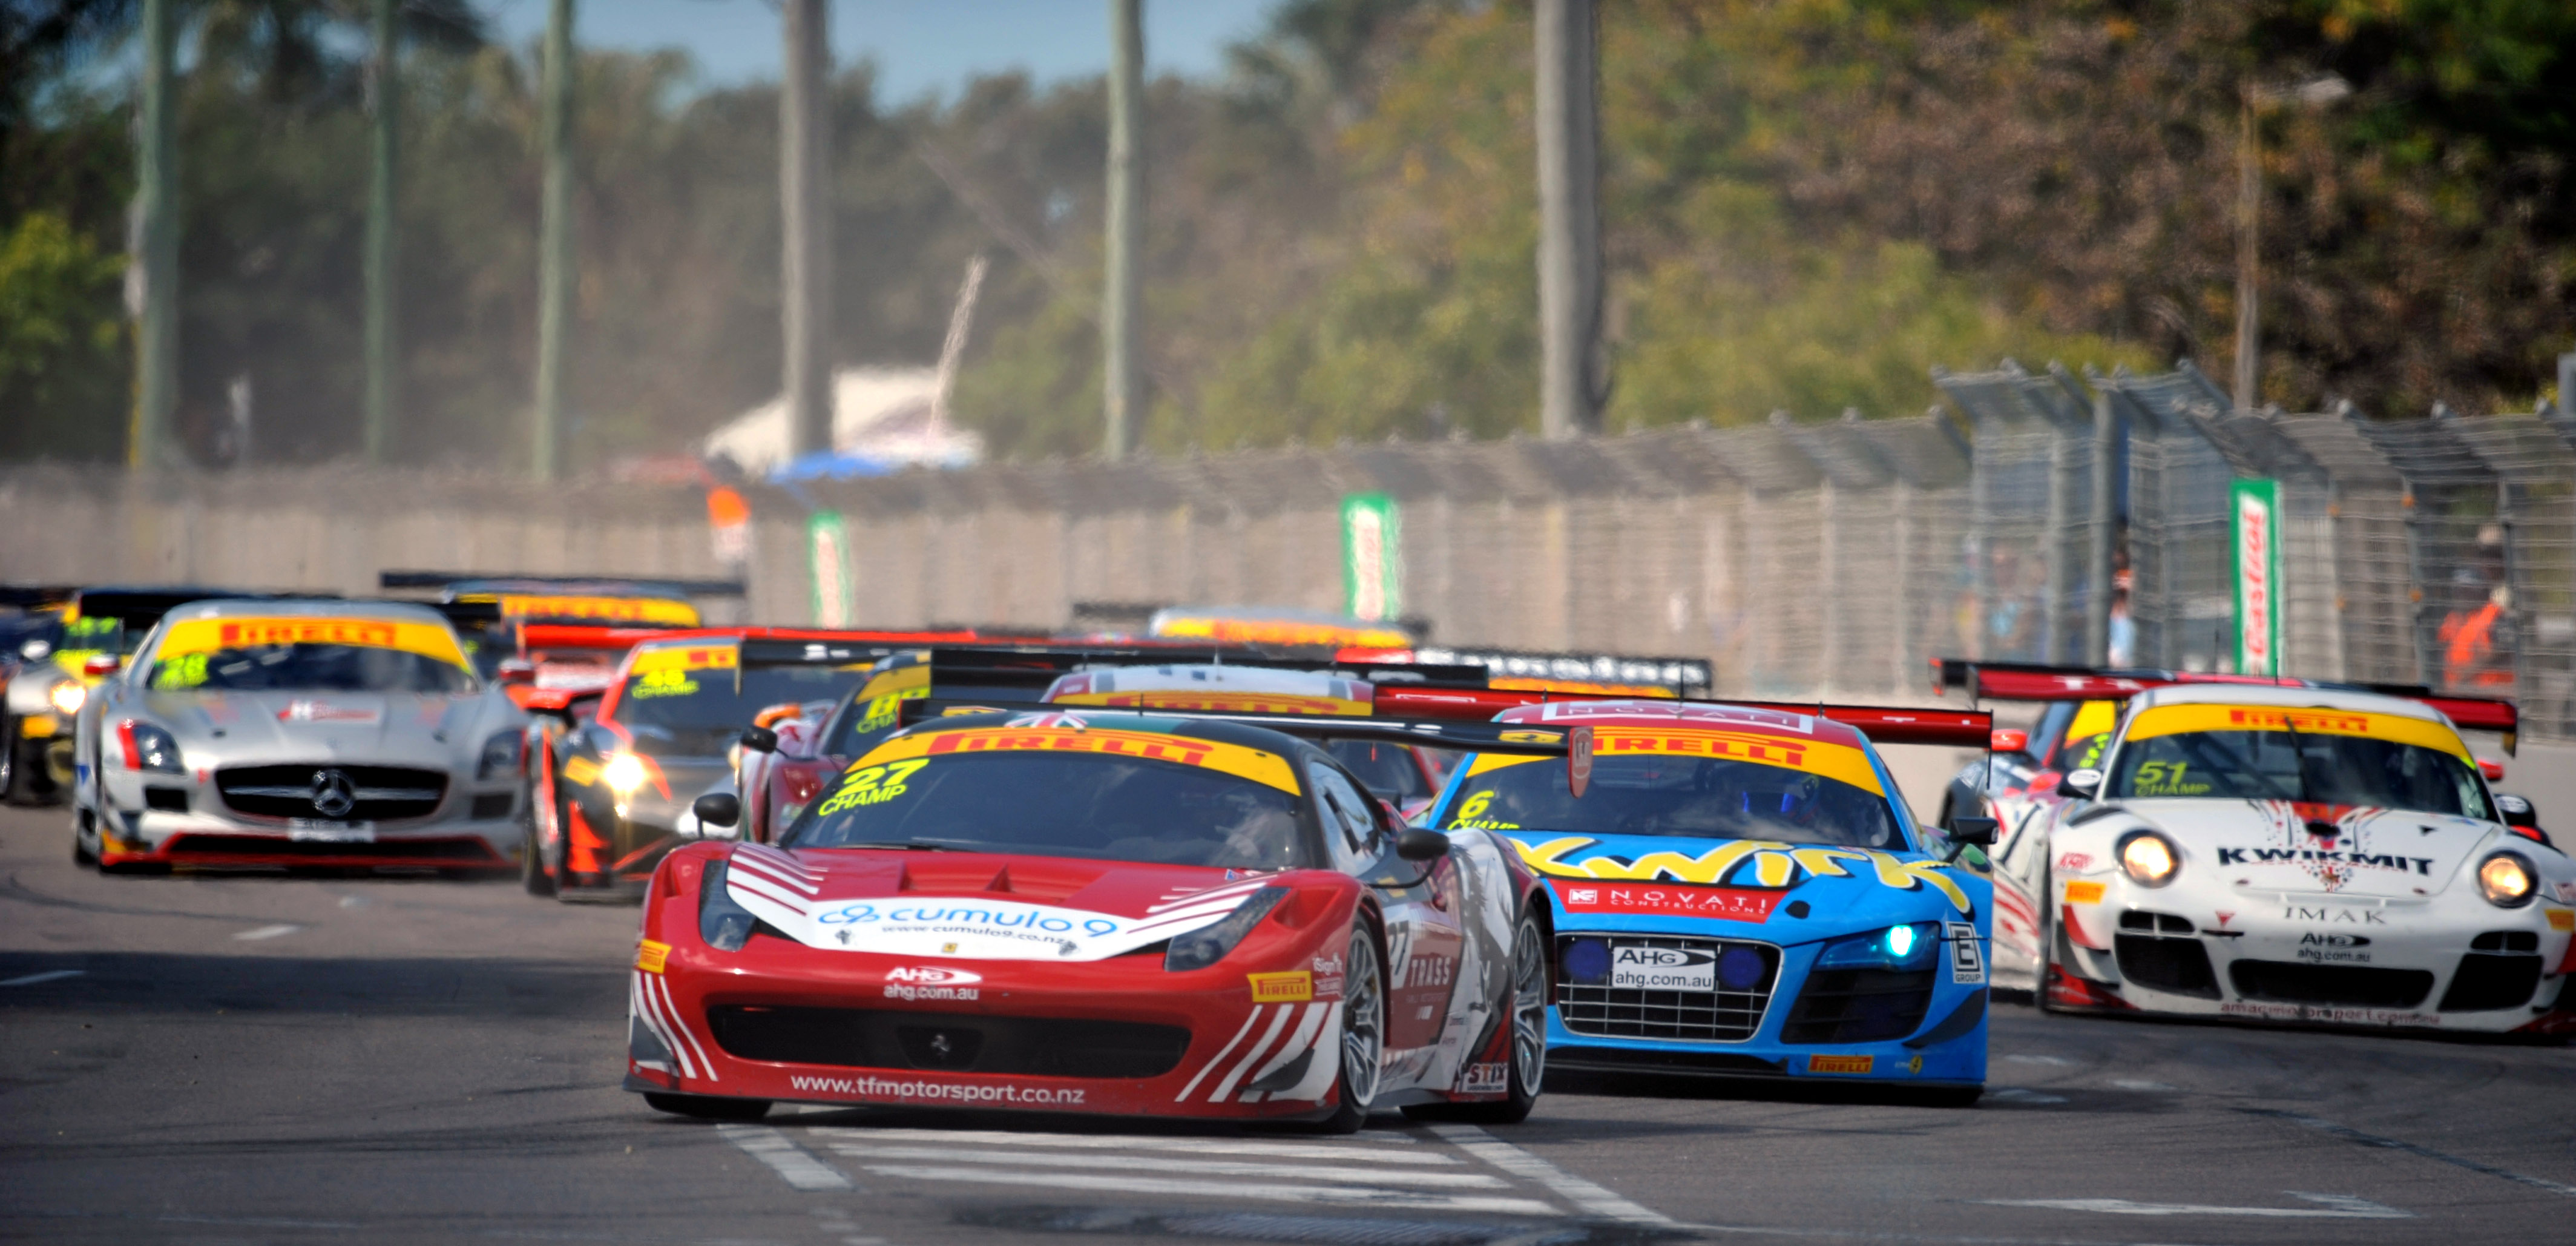 Lap and pole position records for TFM and Lester in Townsville